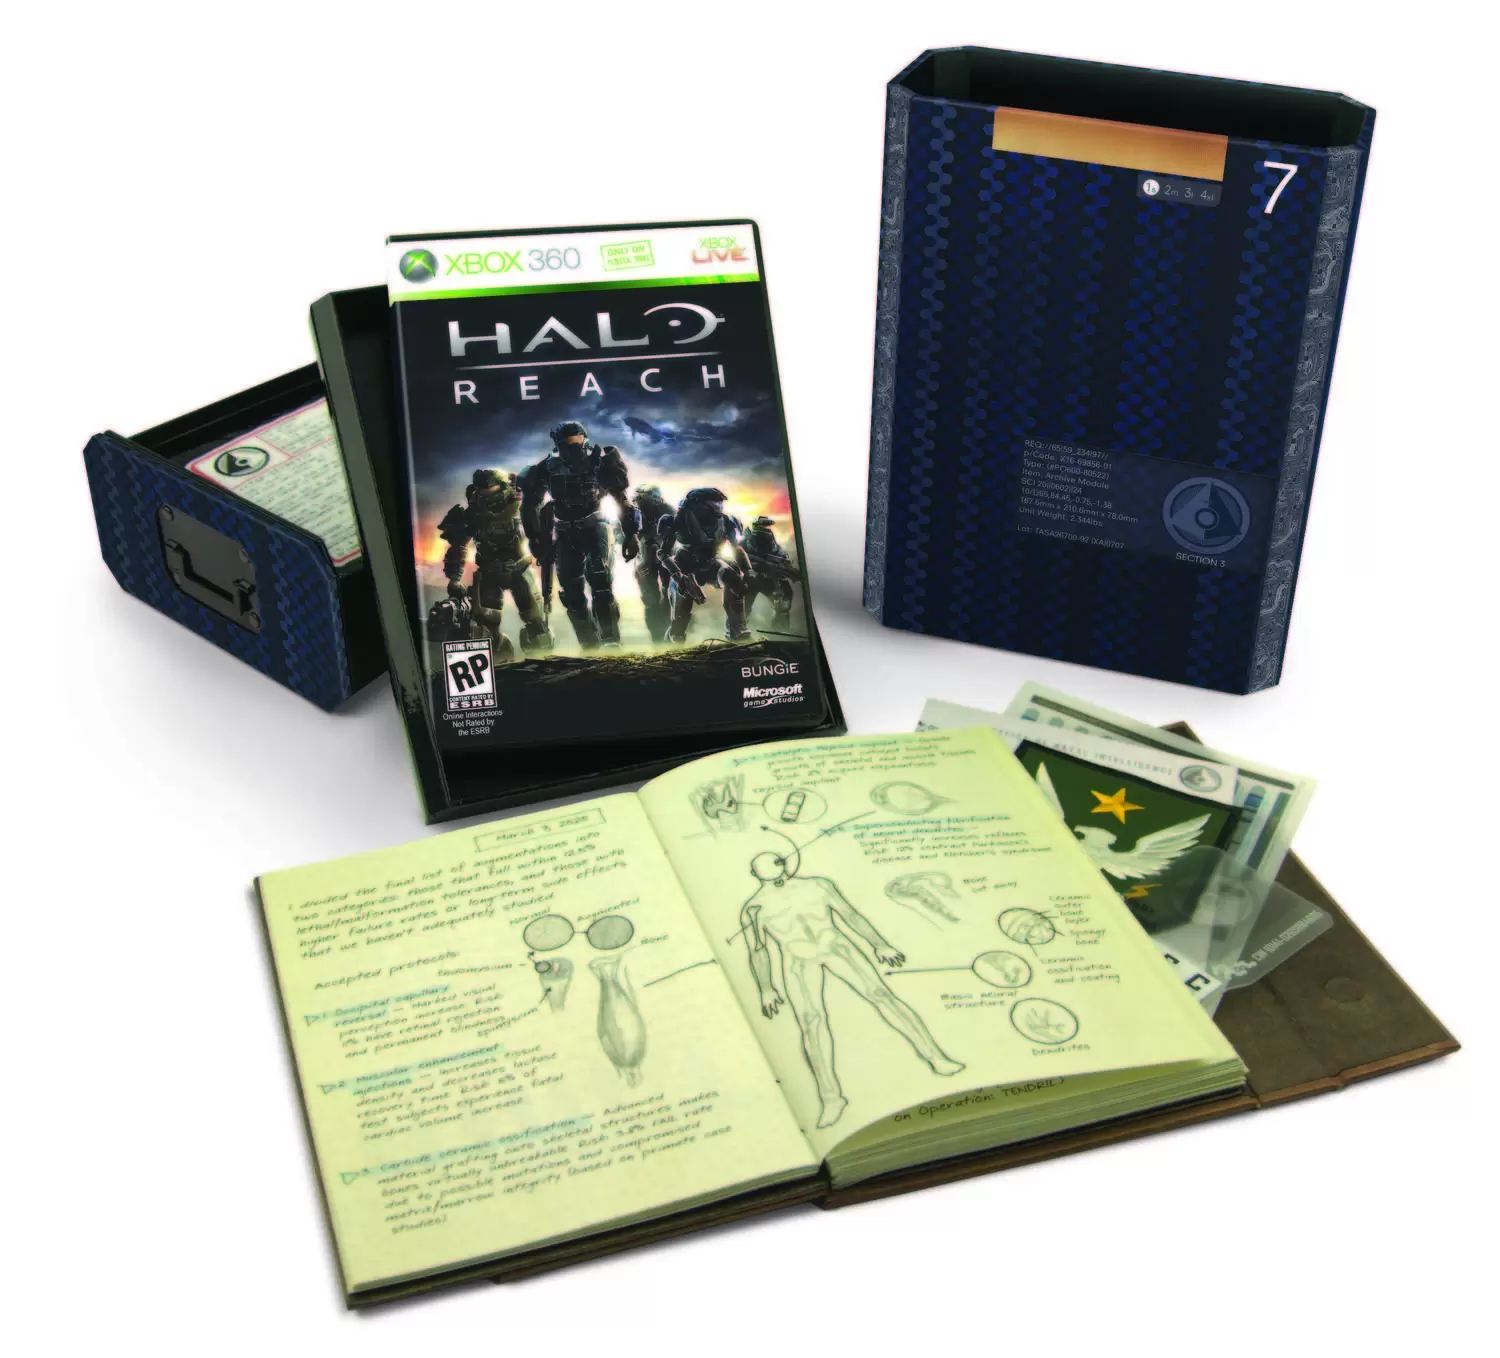 XBOX 360 Games - Halo: Reach Limited Edition